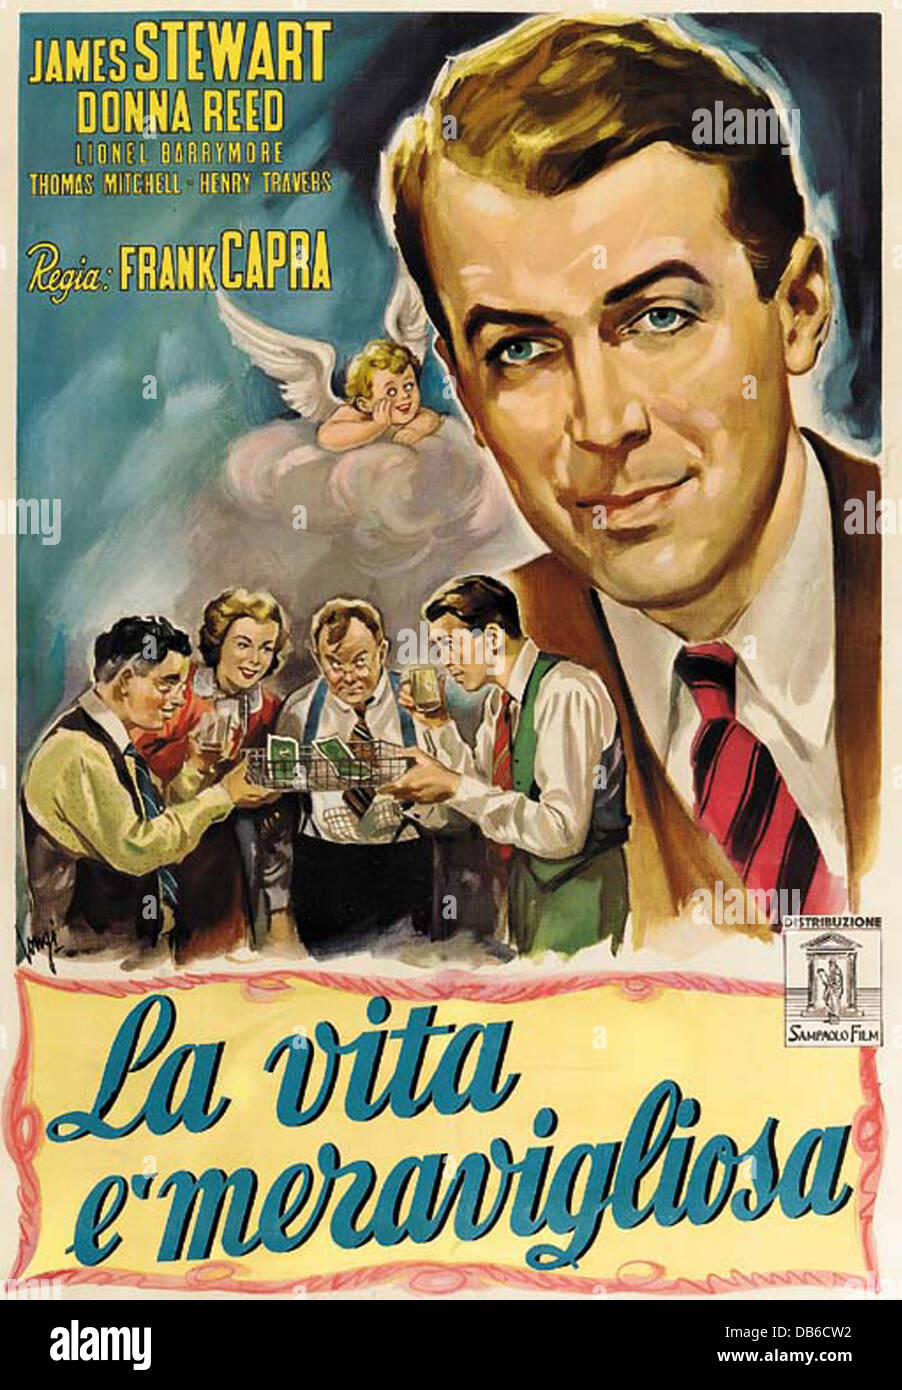 Directed by Frank Capra. ITALIAN MOVIE POSTER